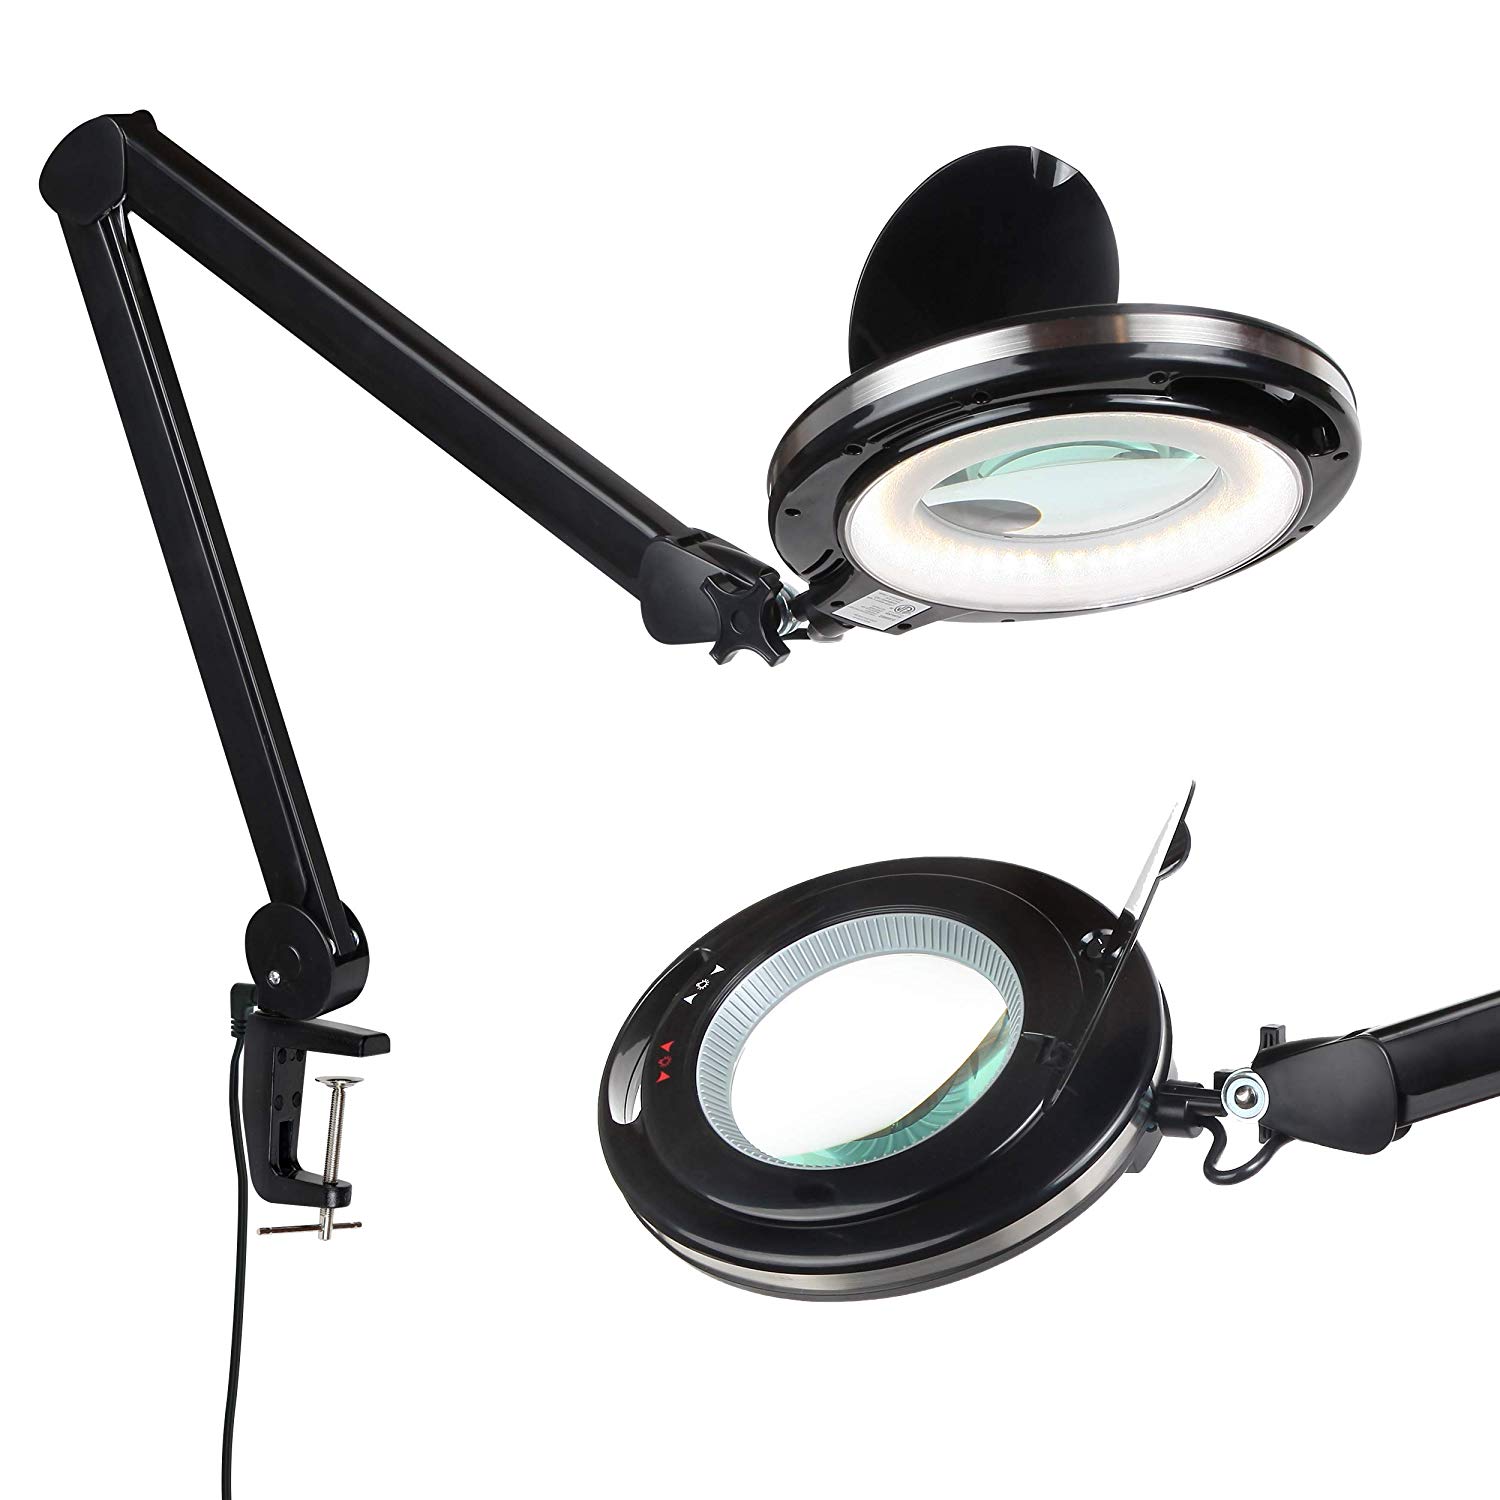 Magnifying Clamp Lamp Brightech Light View Pro Led Magnifying Lamp